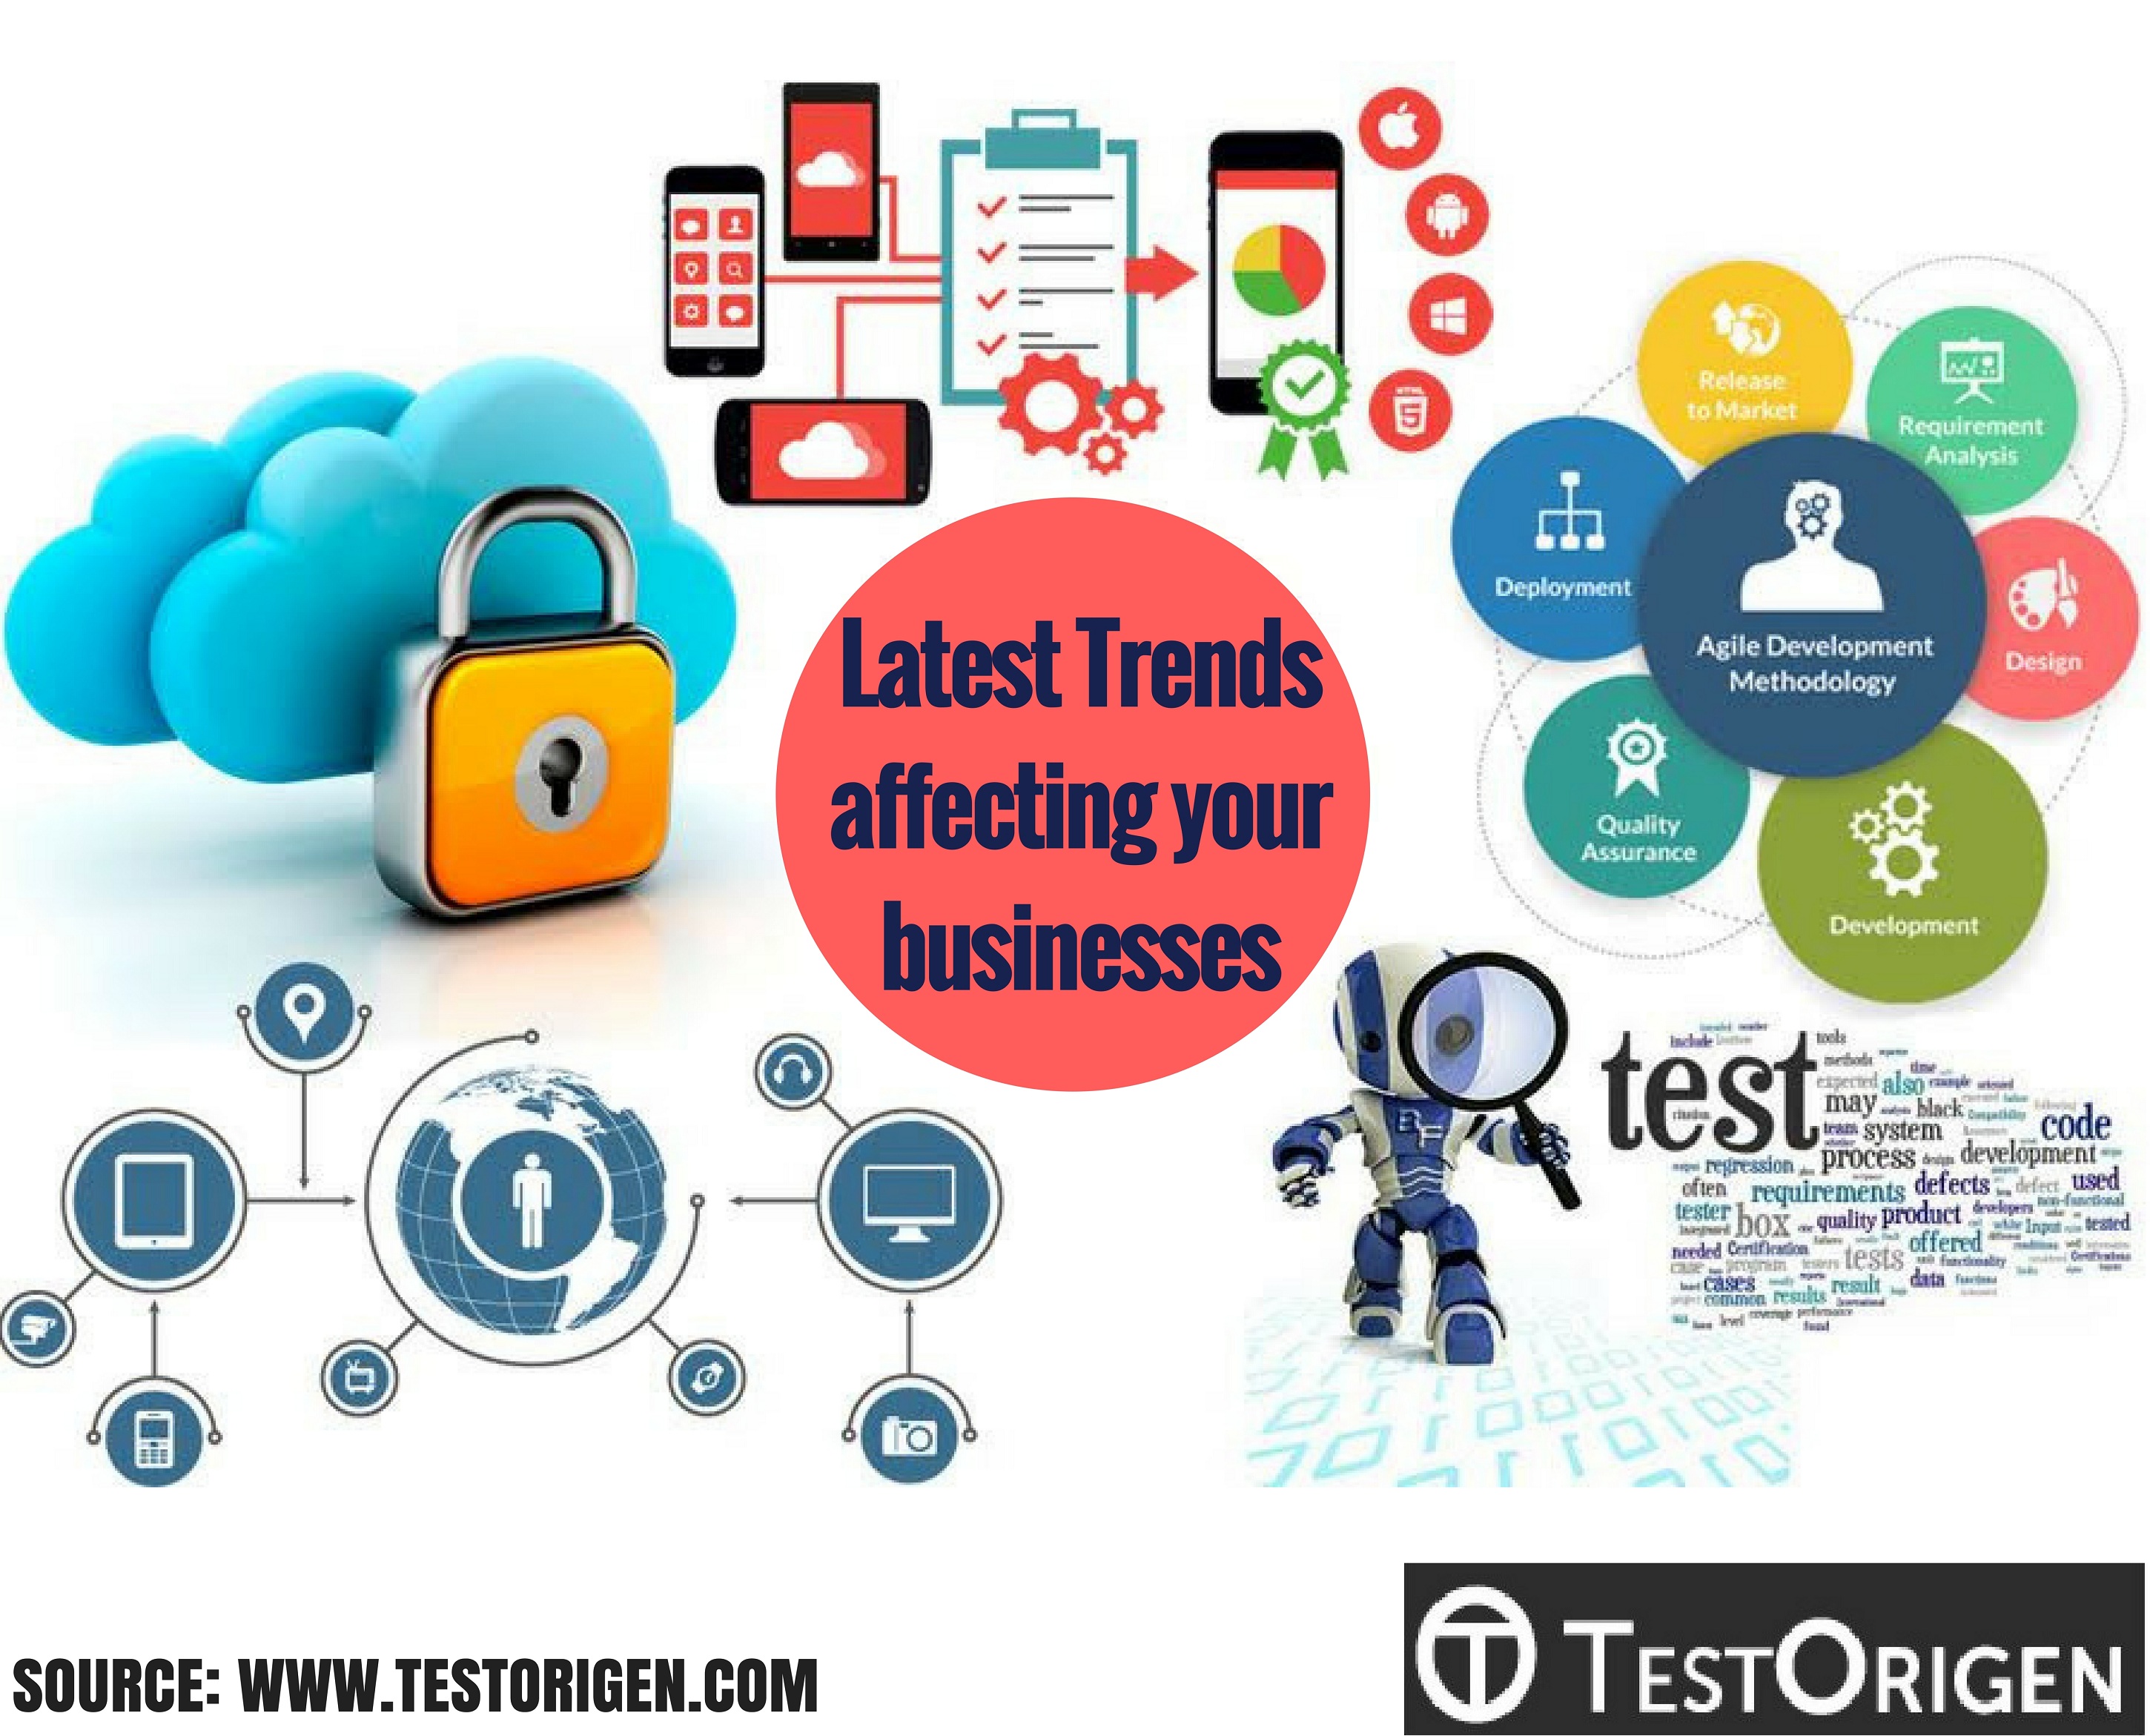 Latest Trends affecting your businesses